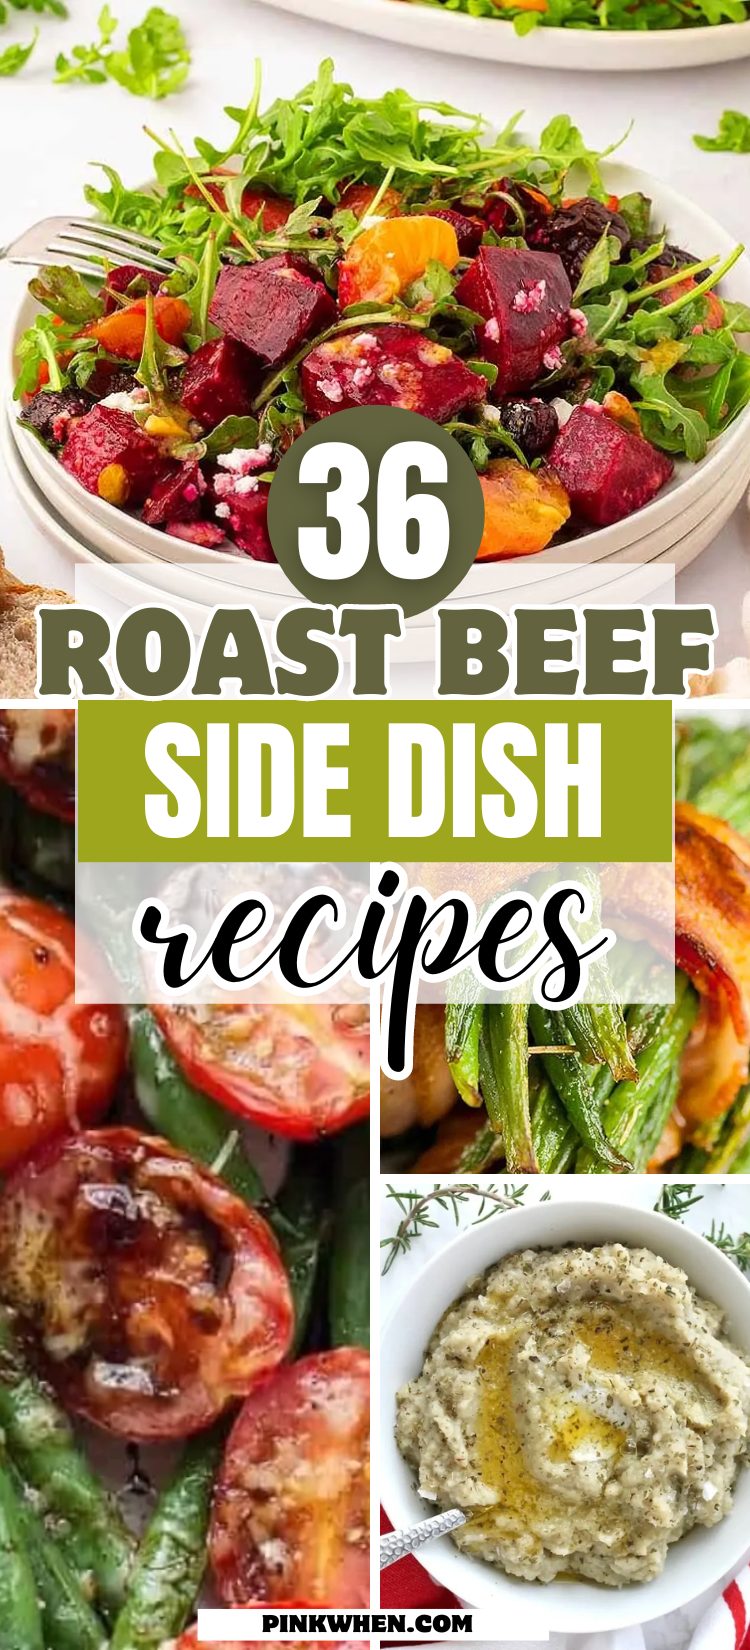 36 Roast Beef Side Dish Recipes – What To Serve With Roast Beef